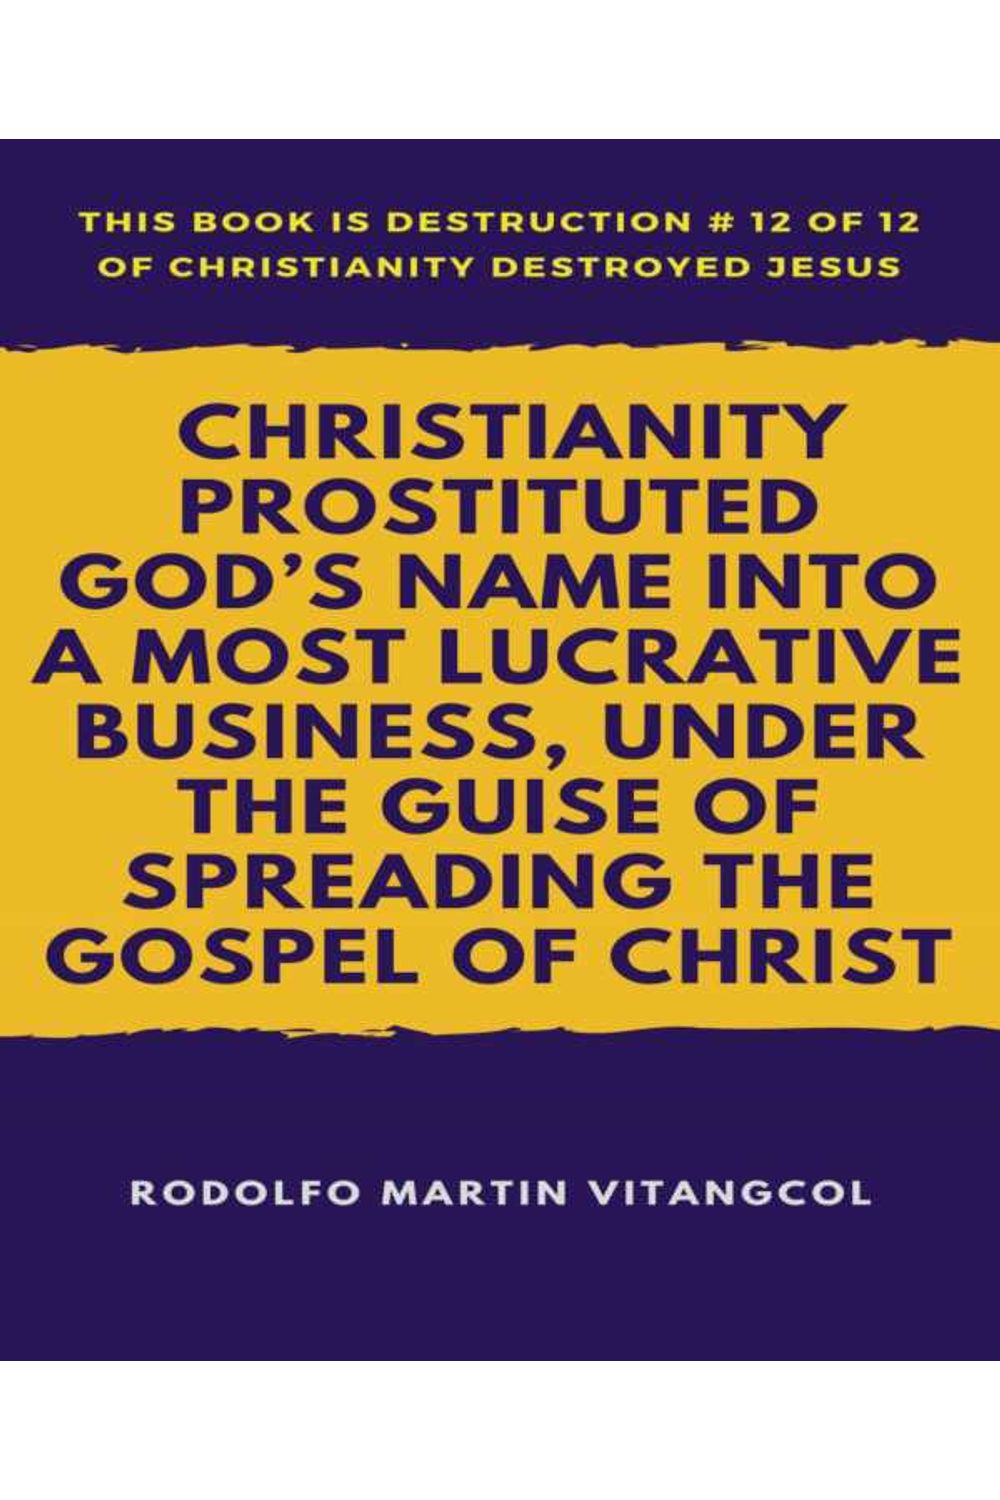 bw-christianity-prostituted-gods-name-into-a-most-lucrative-business-under-the-guise-of-spreading-the-gospel-of-christ-bookrix-9783743893894